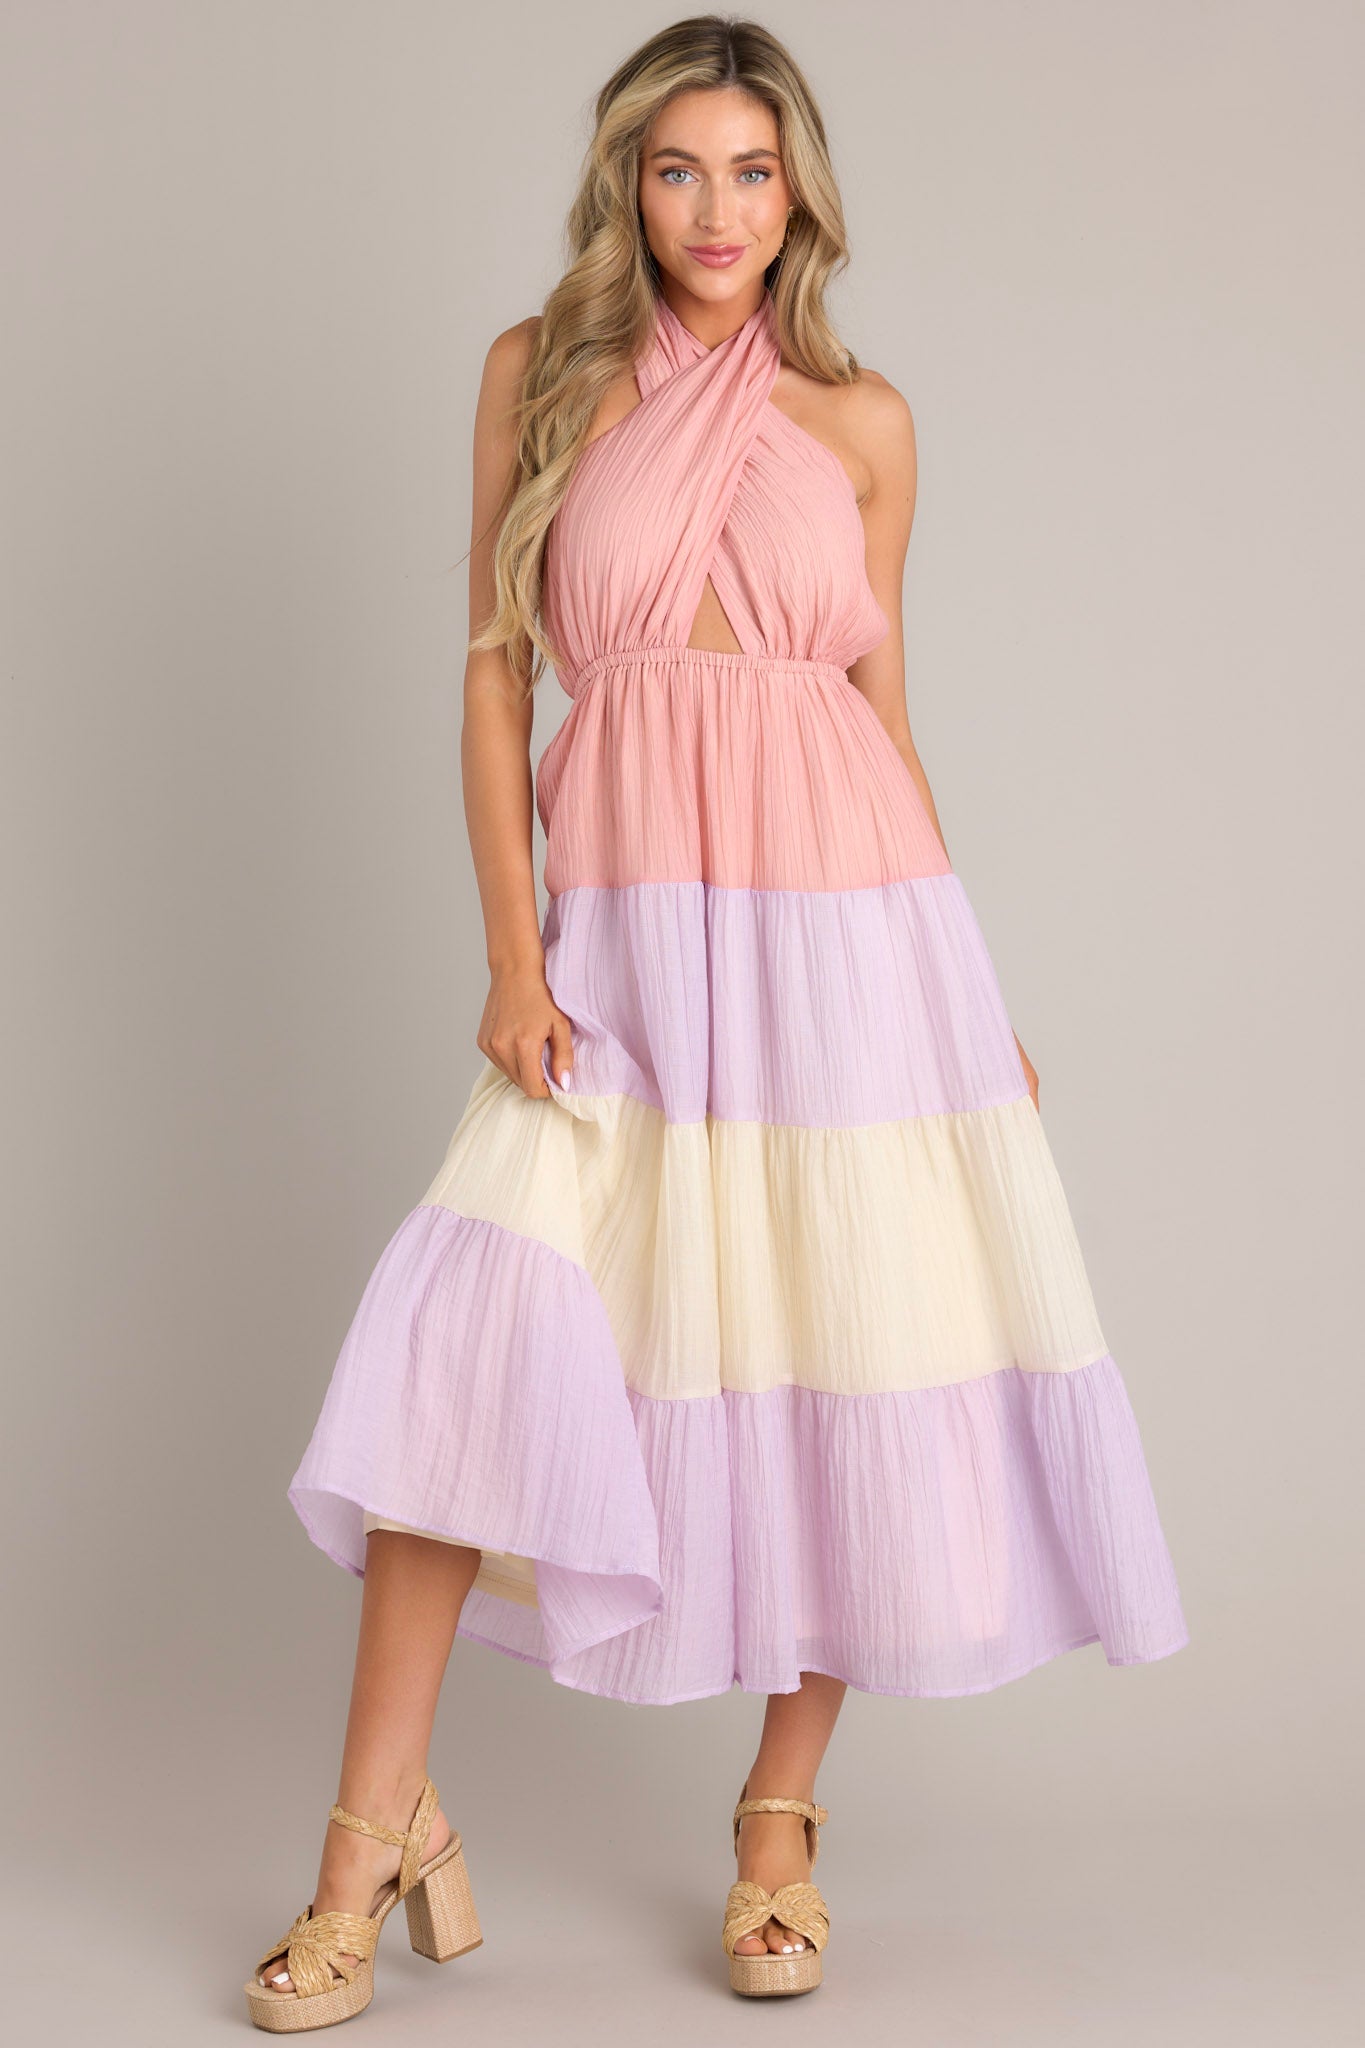 Full body view of this Pink dress featuring a self-tie halter neckline with a back tie closure, an alluring open back, an elastic band at the back of the bust for a comfortable fit, an elastic waistband, and a flowing skirt.